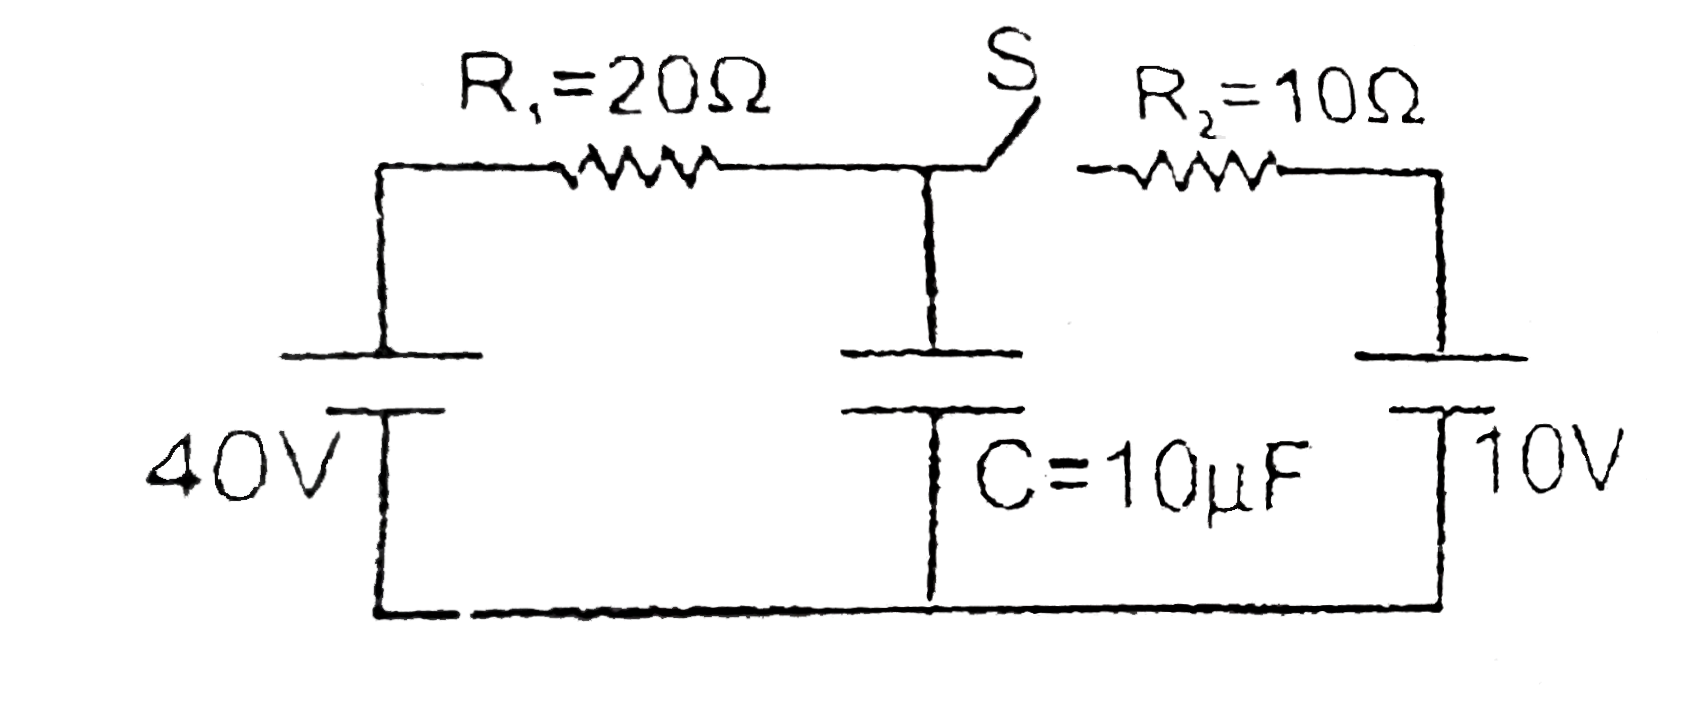 The circuit consists of two resistors (of resistance R(1) = 20 Omega and R(2) = 10 Omega), a capacitor (of capacitance C =10 muF) and two ideal cells. In the circuit shown the capacitor is in steady state and the switch S is open      The charge on capacitor in steady state with switch S closed.